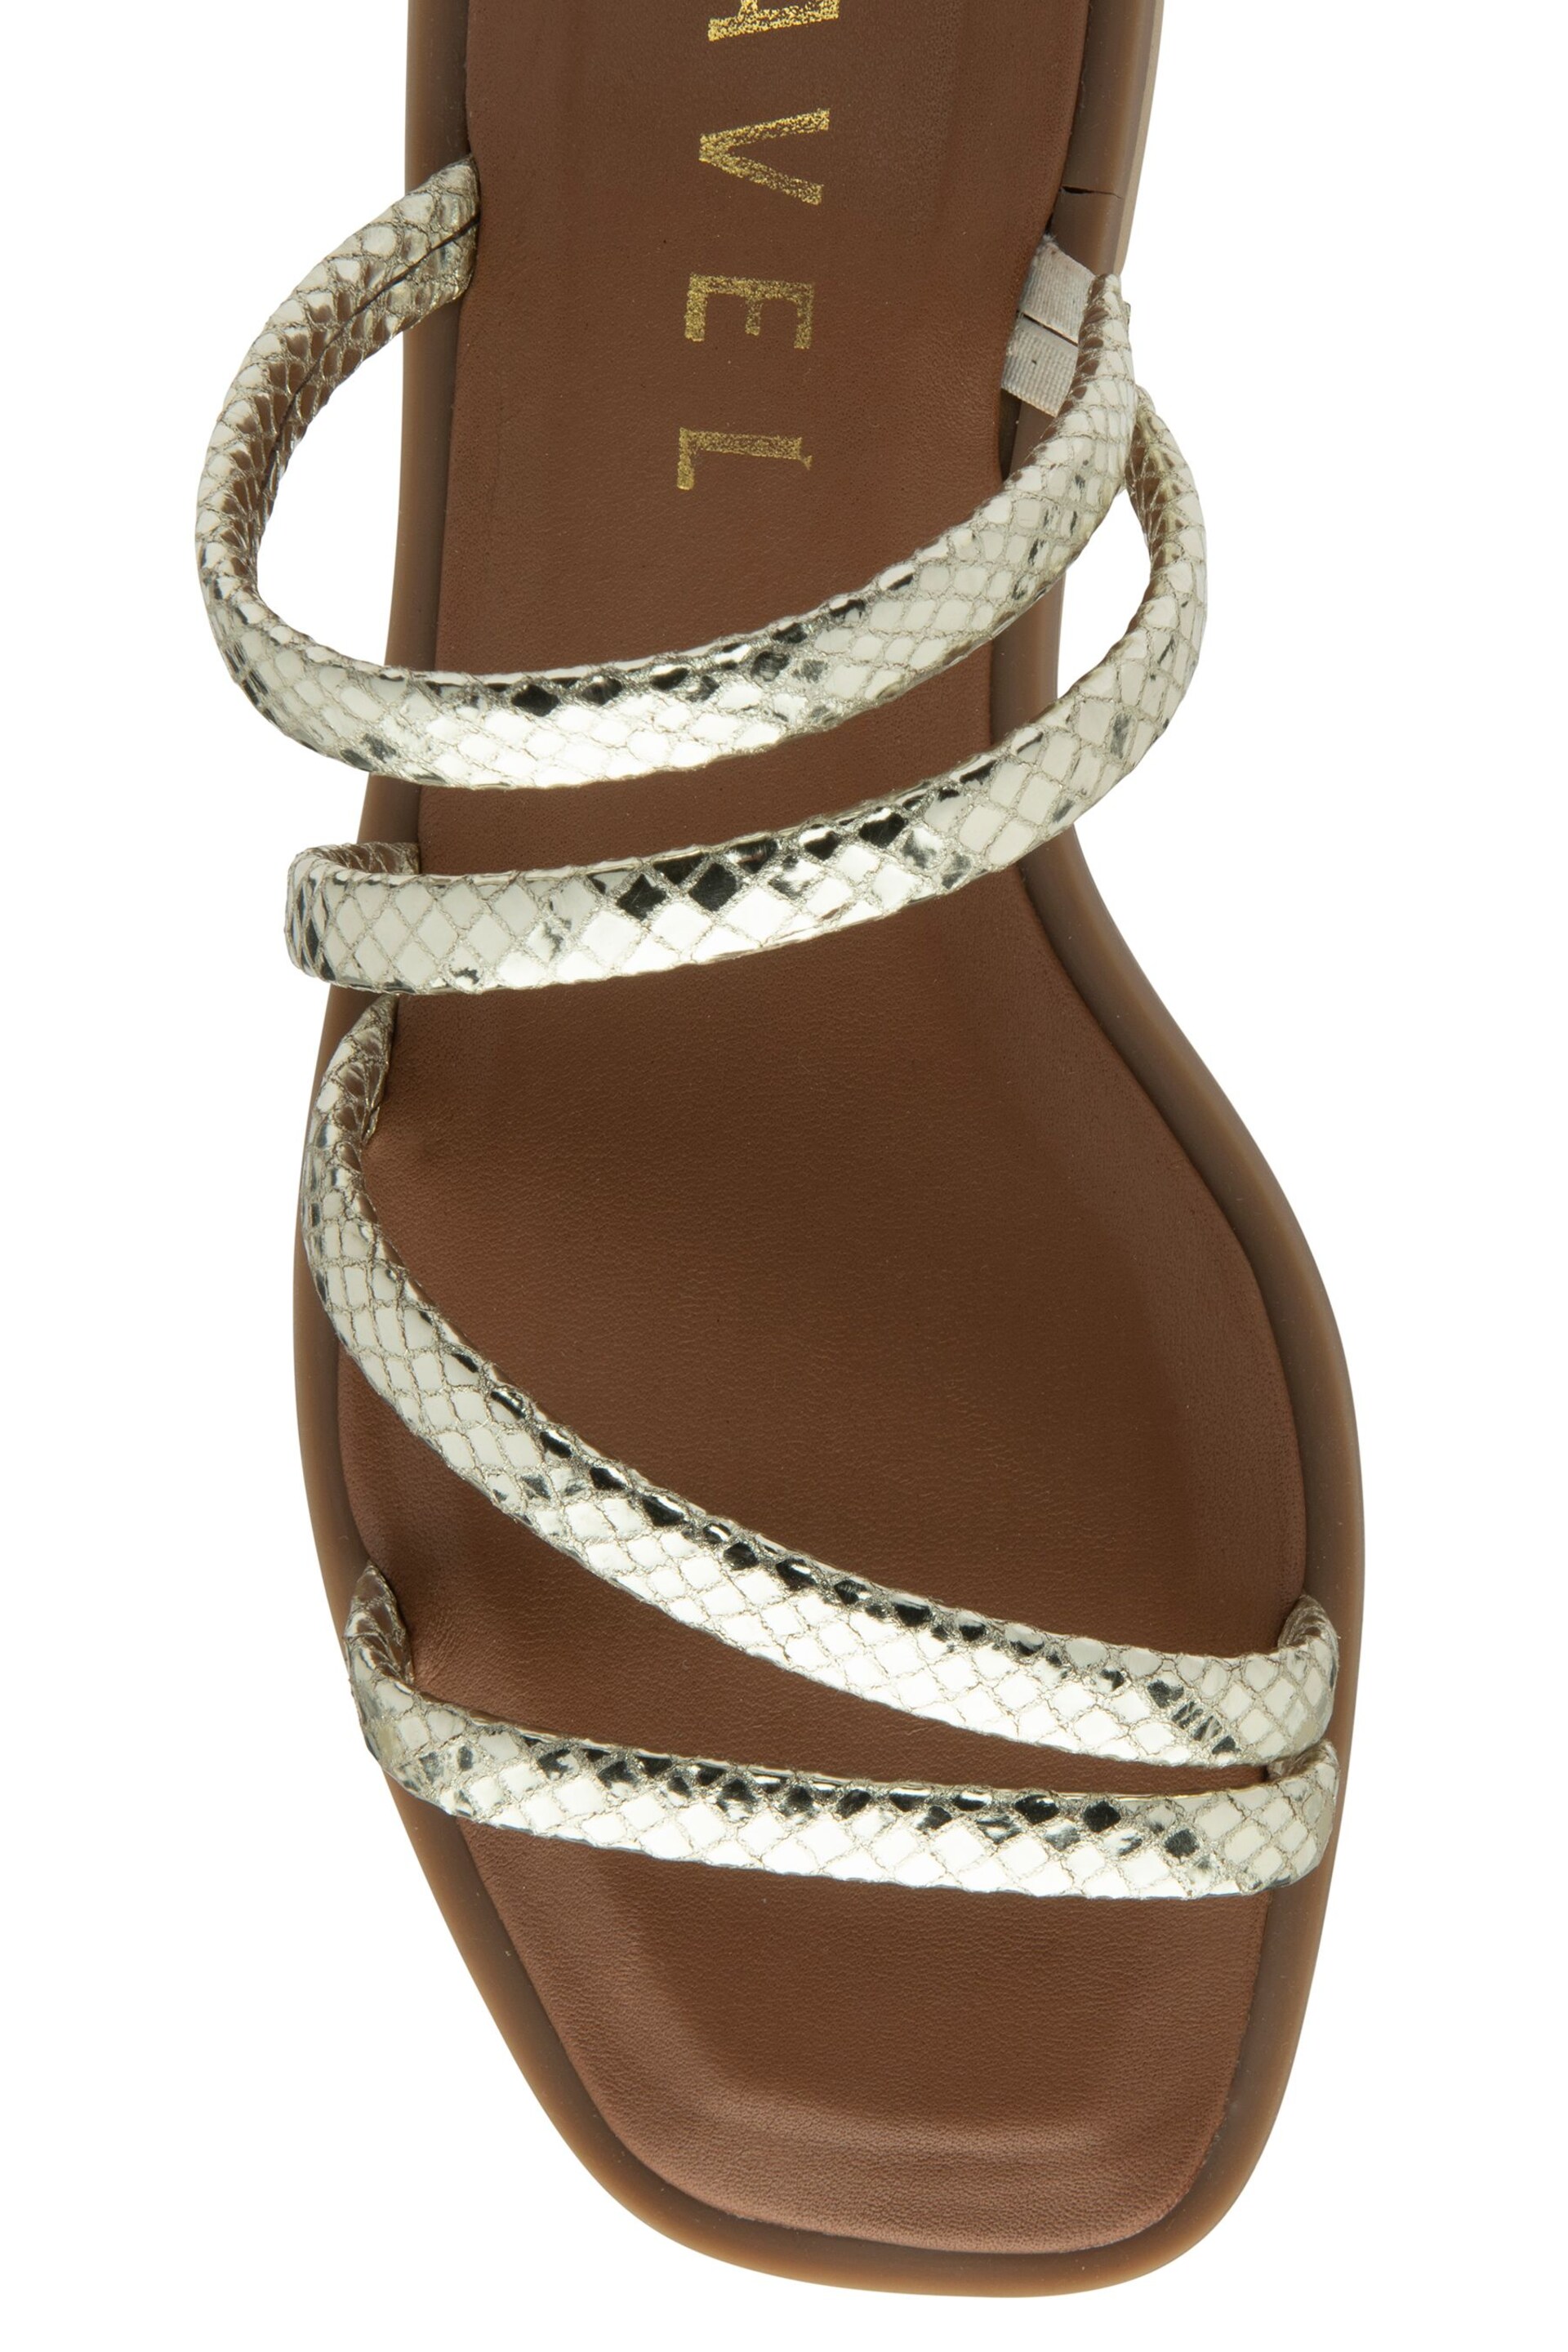 Ravel Silver/Brown Flat Strappy Mule Sandals - Image 4 of 4